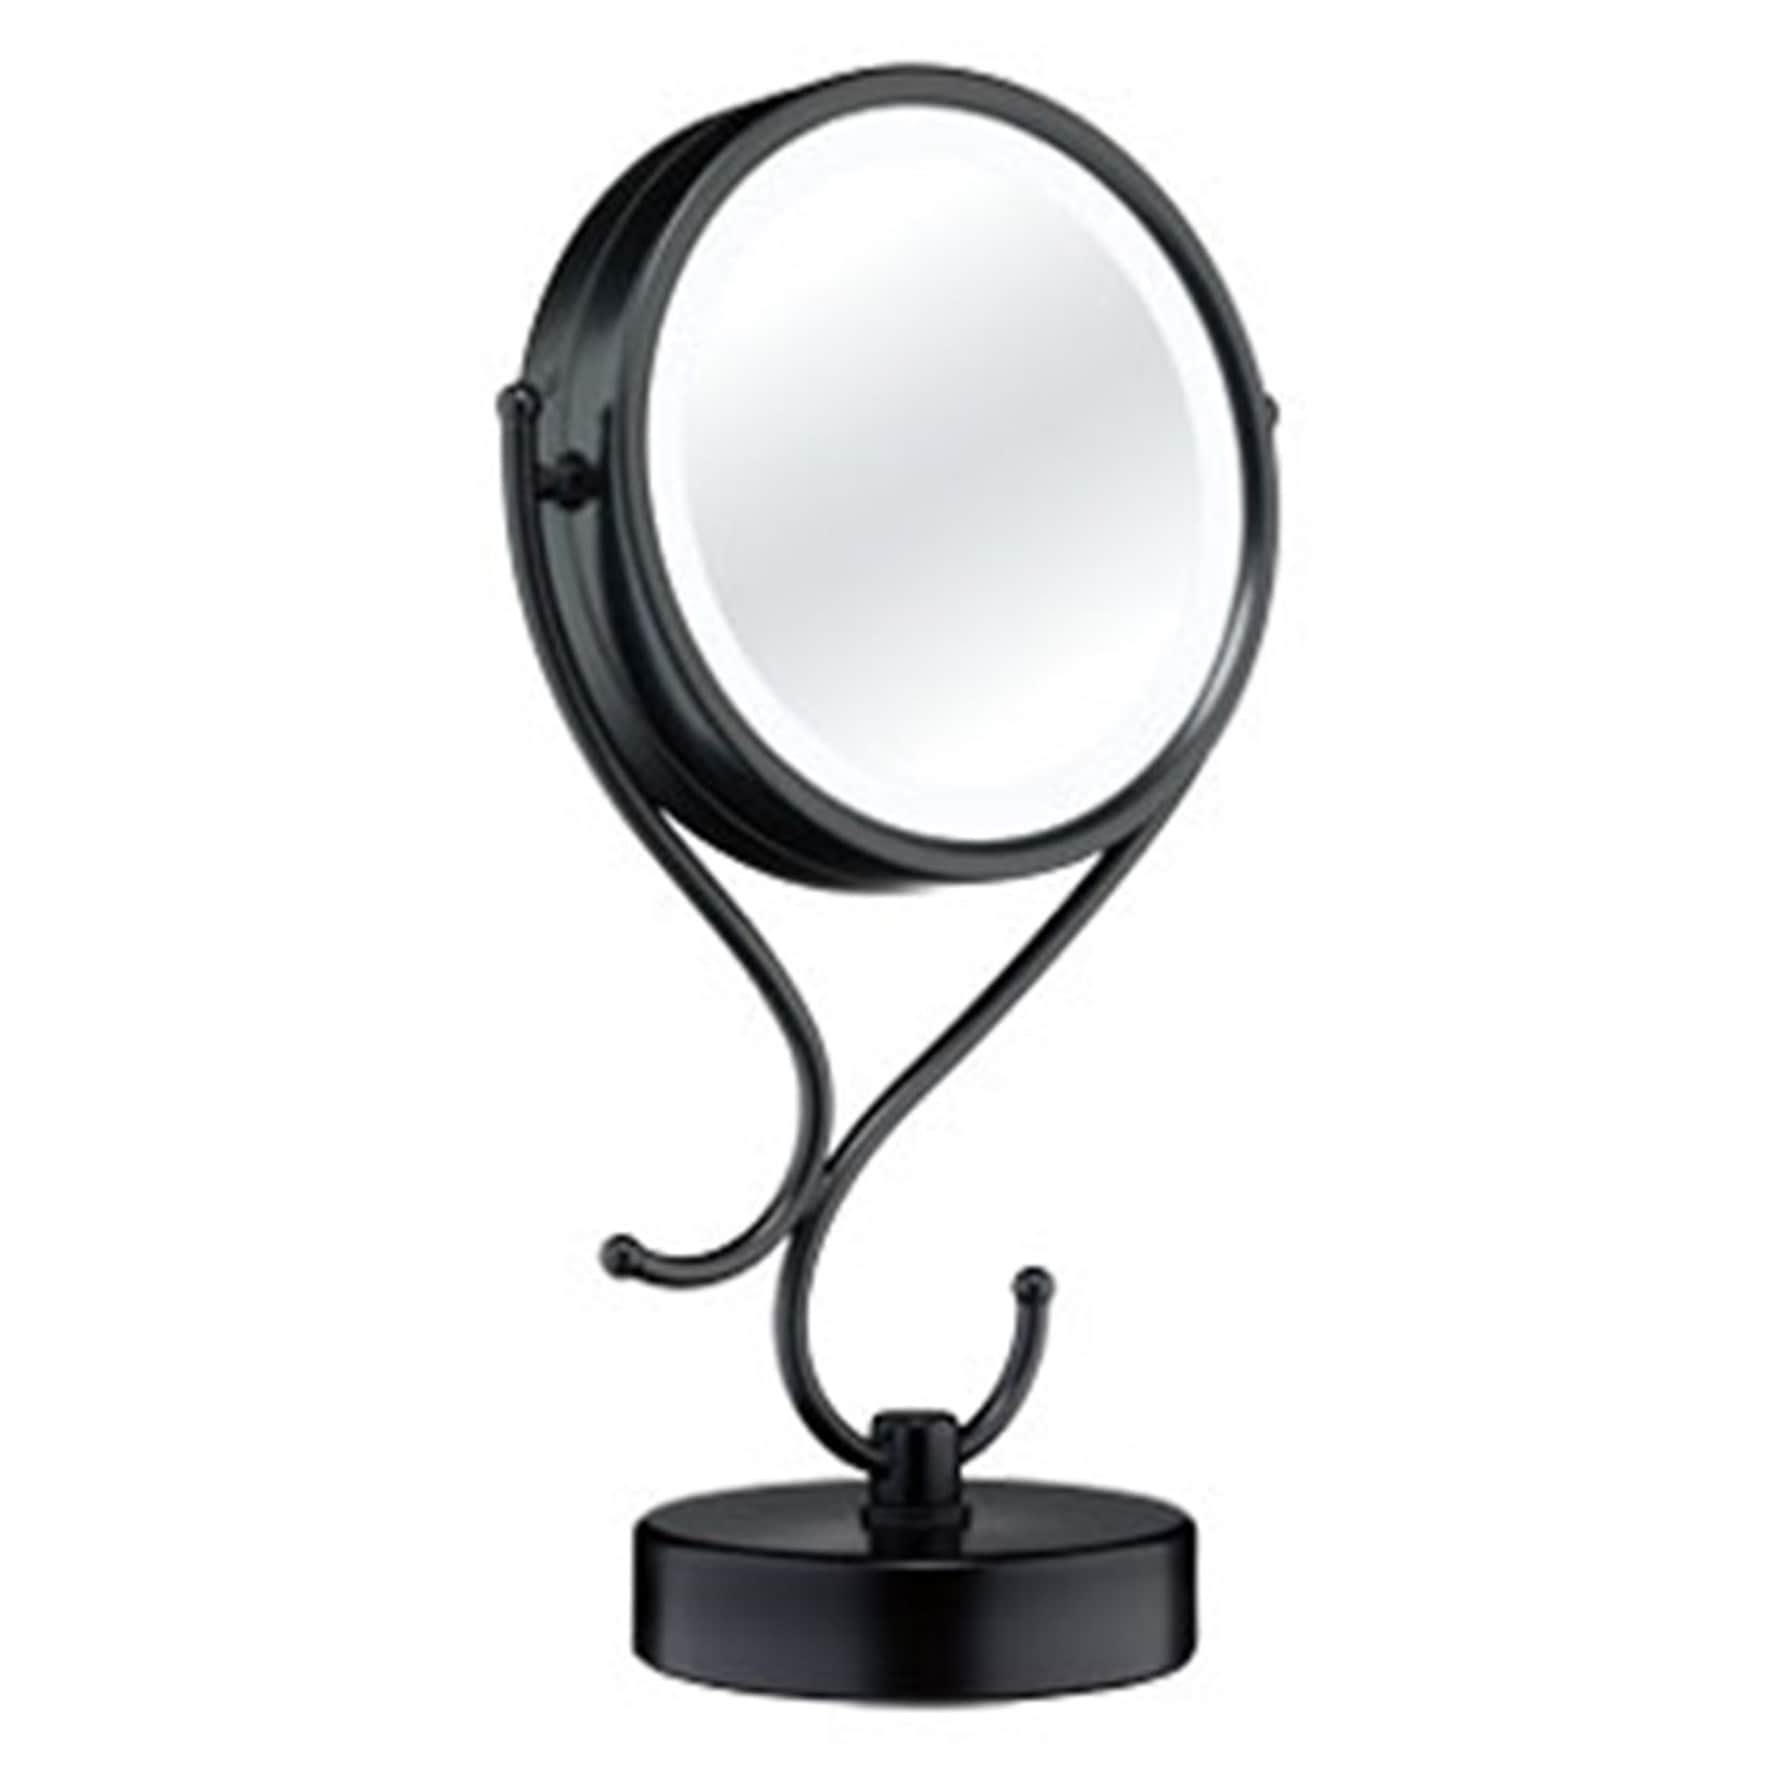 Light In The Makeup Mirrors, How To Change Light Bulb In Conair Mirror